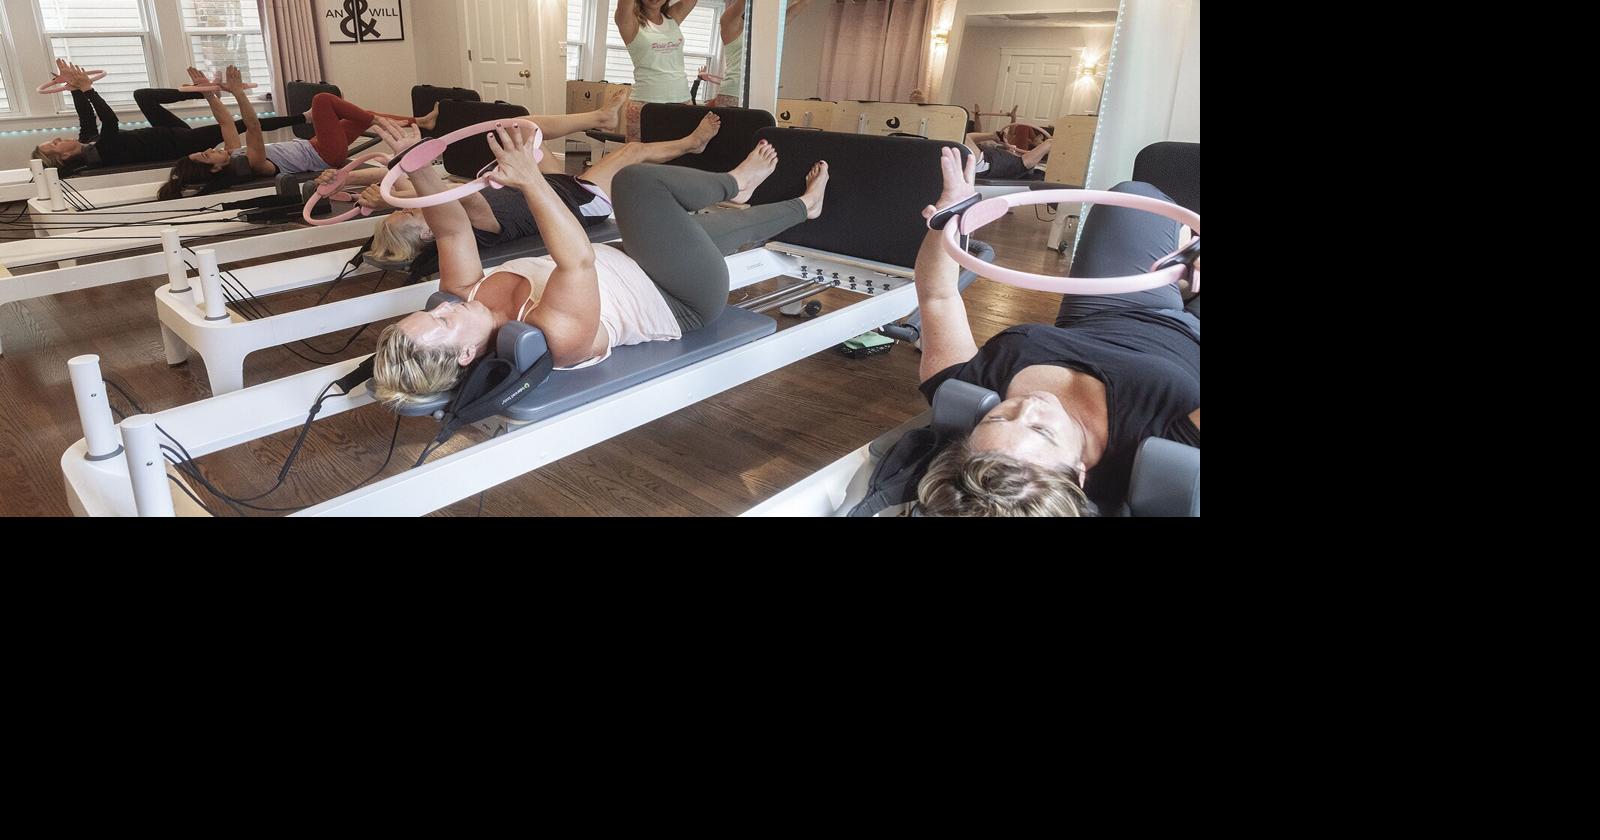 Club Pilates North Center – Southport Corridor News and Events